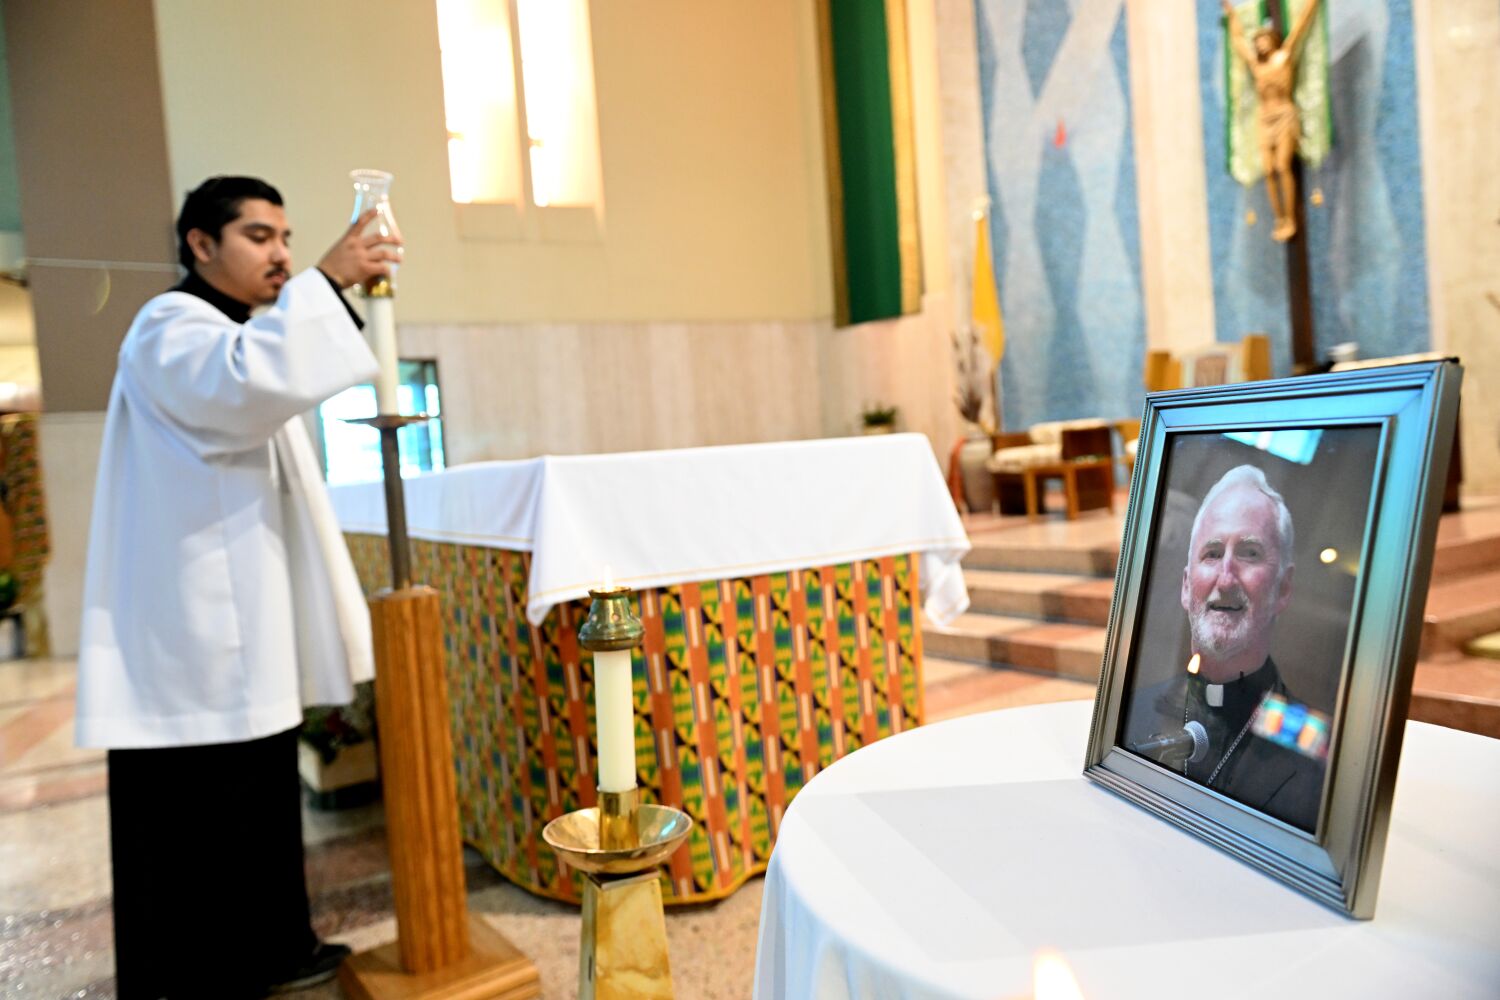 Disbelief after L.A. bishop who devoted his life to others is brutally gunned down